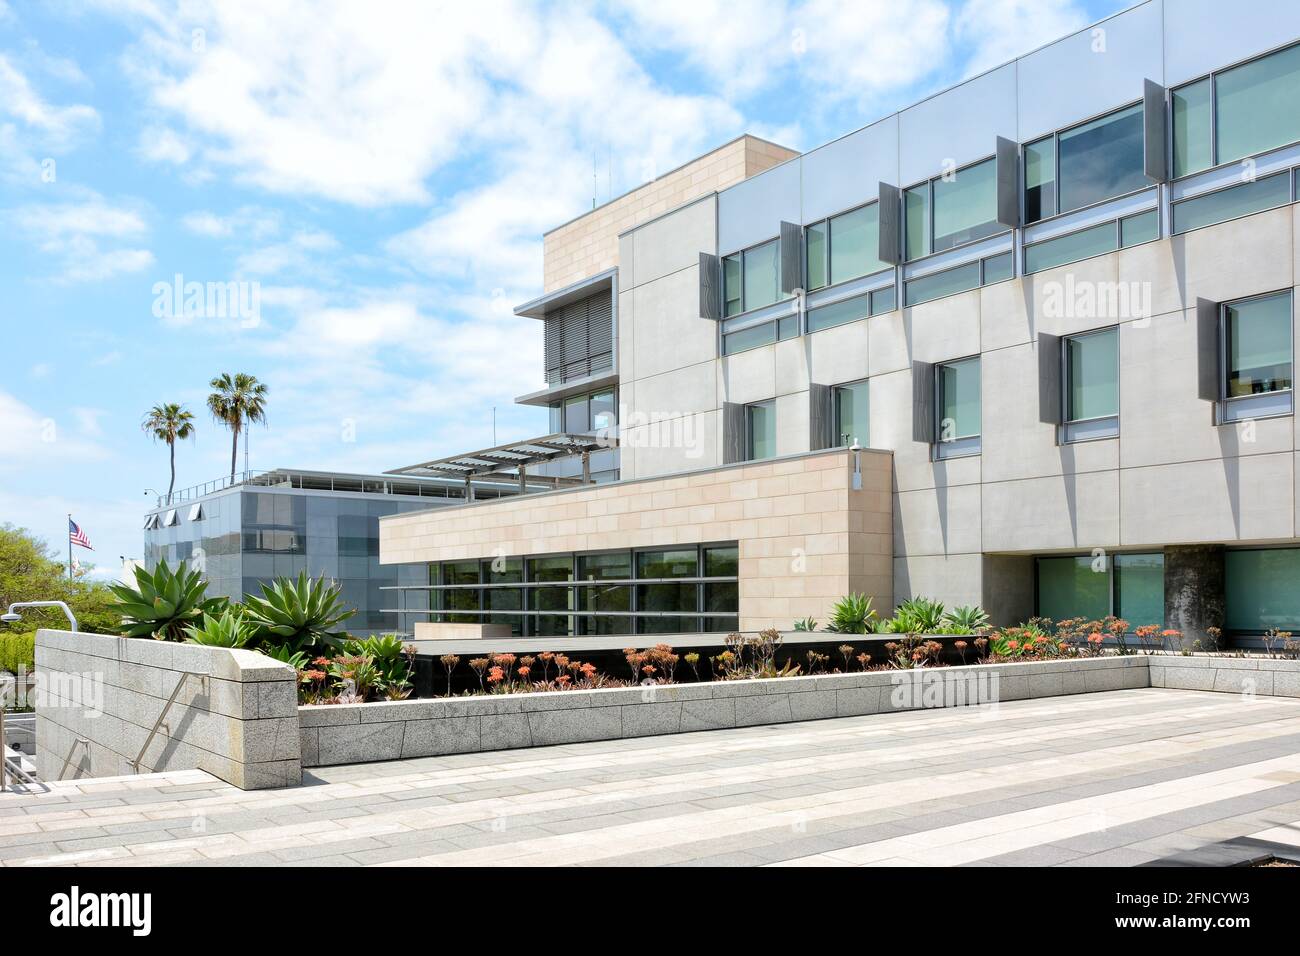 SANTA MONICA, CALIFORNIA - 15 MAY 2021: Santa Monica Public Safety Building, housing the Police Department and Fire Administration. Stock Photo